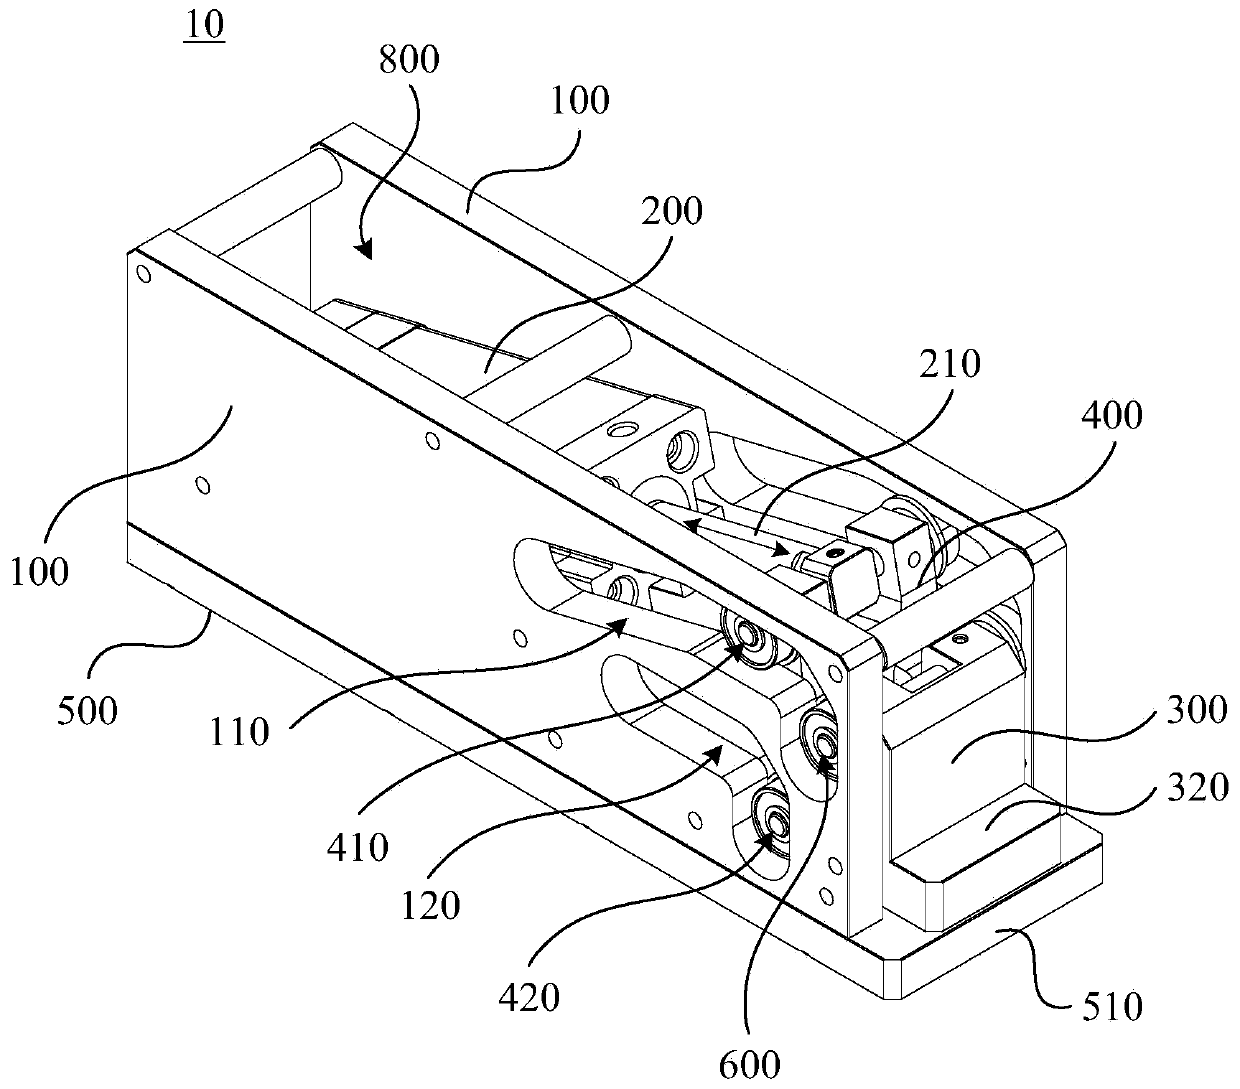 Exposure machine and clamping device for circuit board